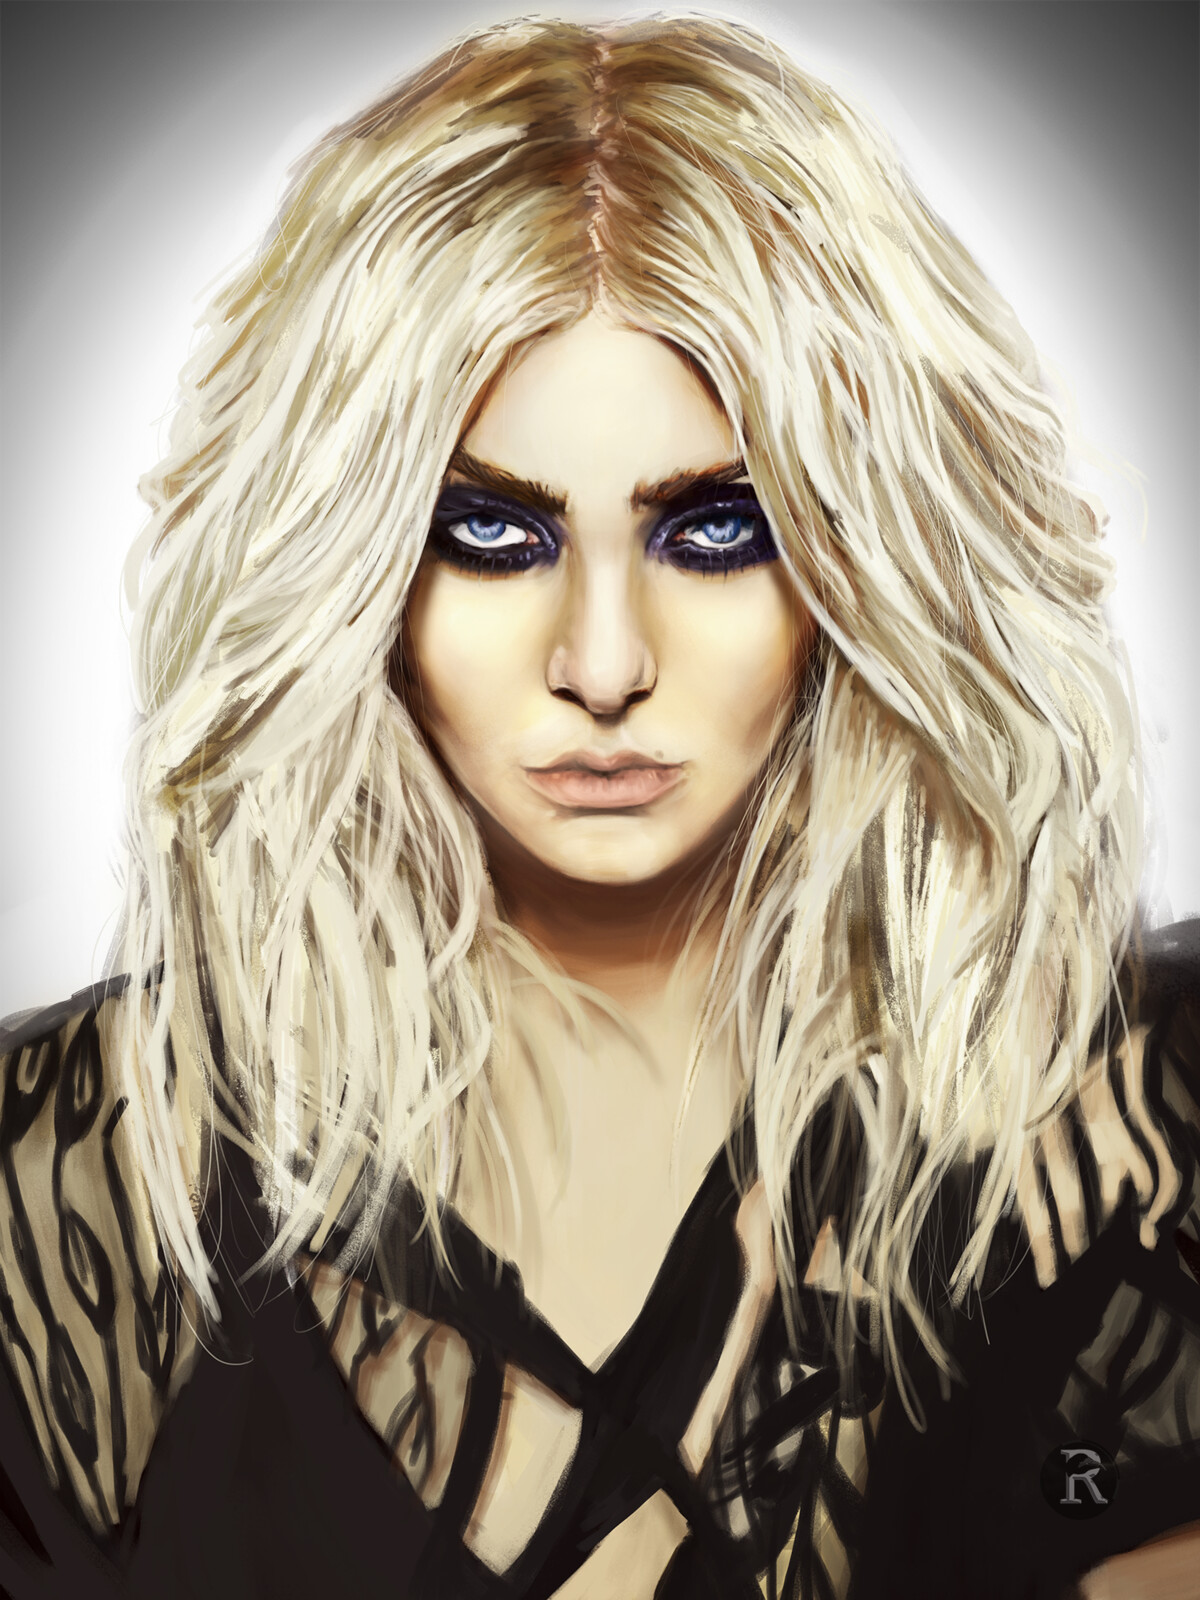 Taylor Momsen -The Pretty Reckless